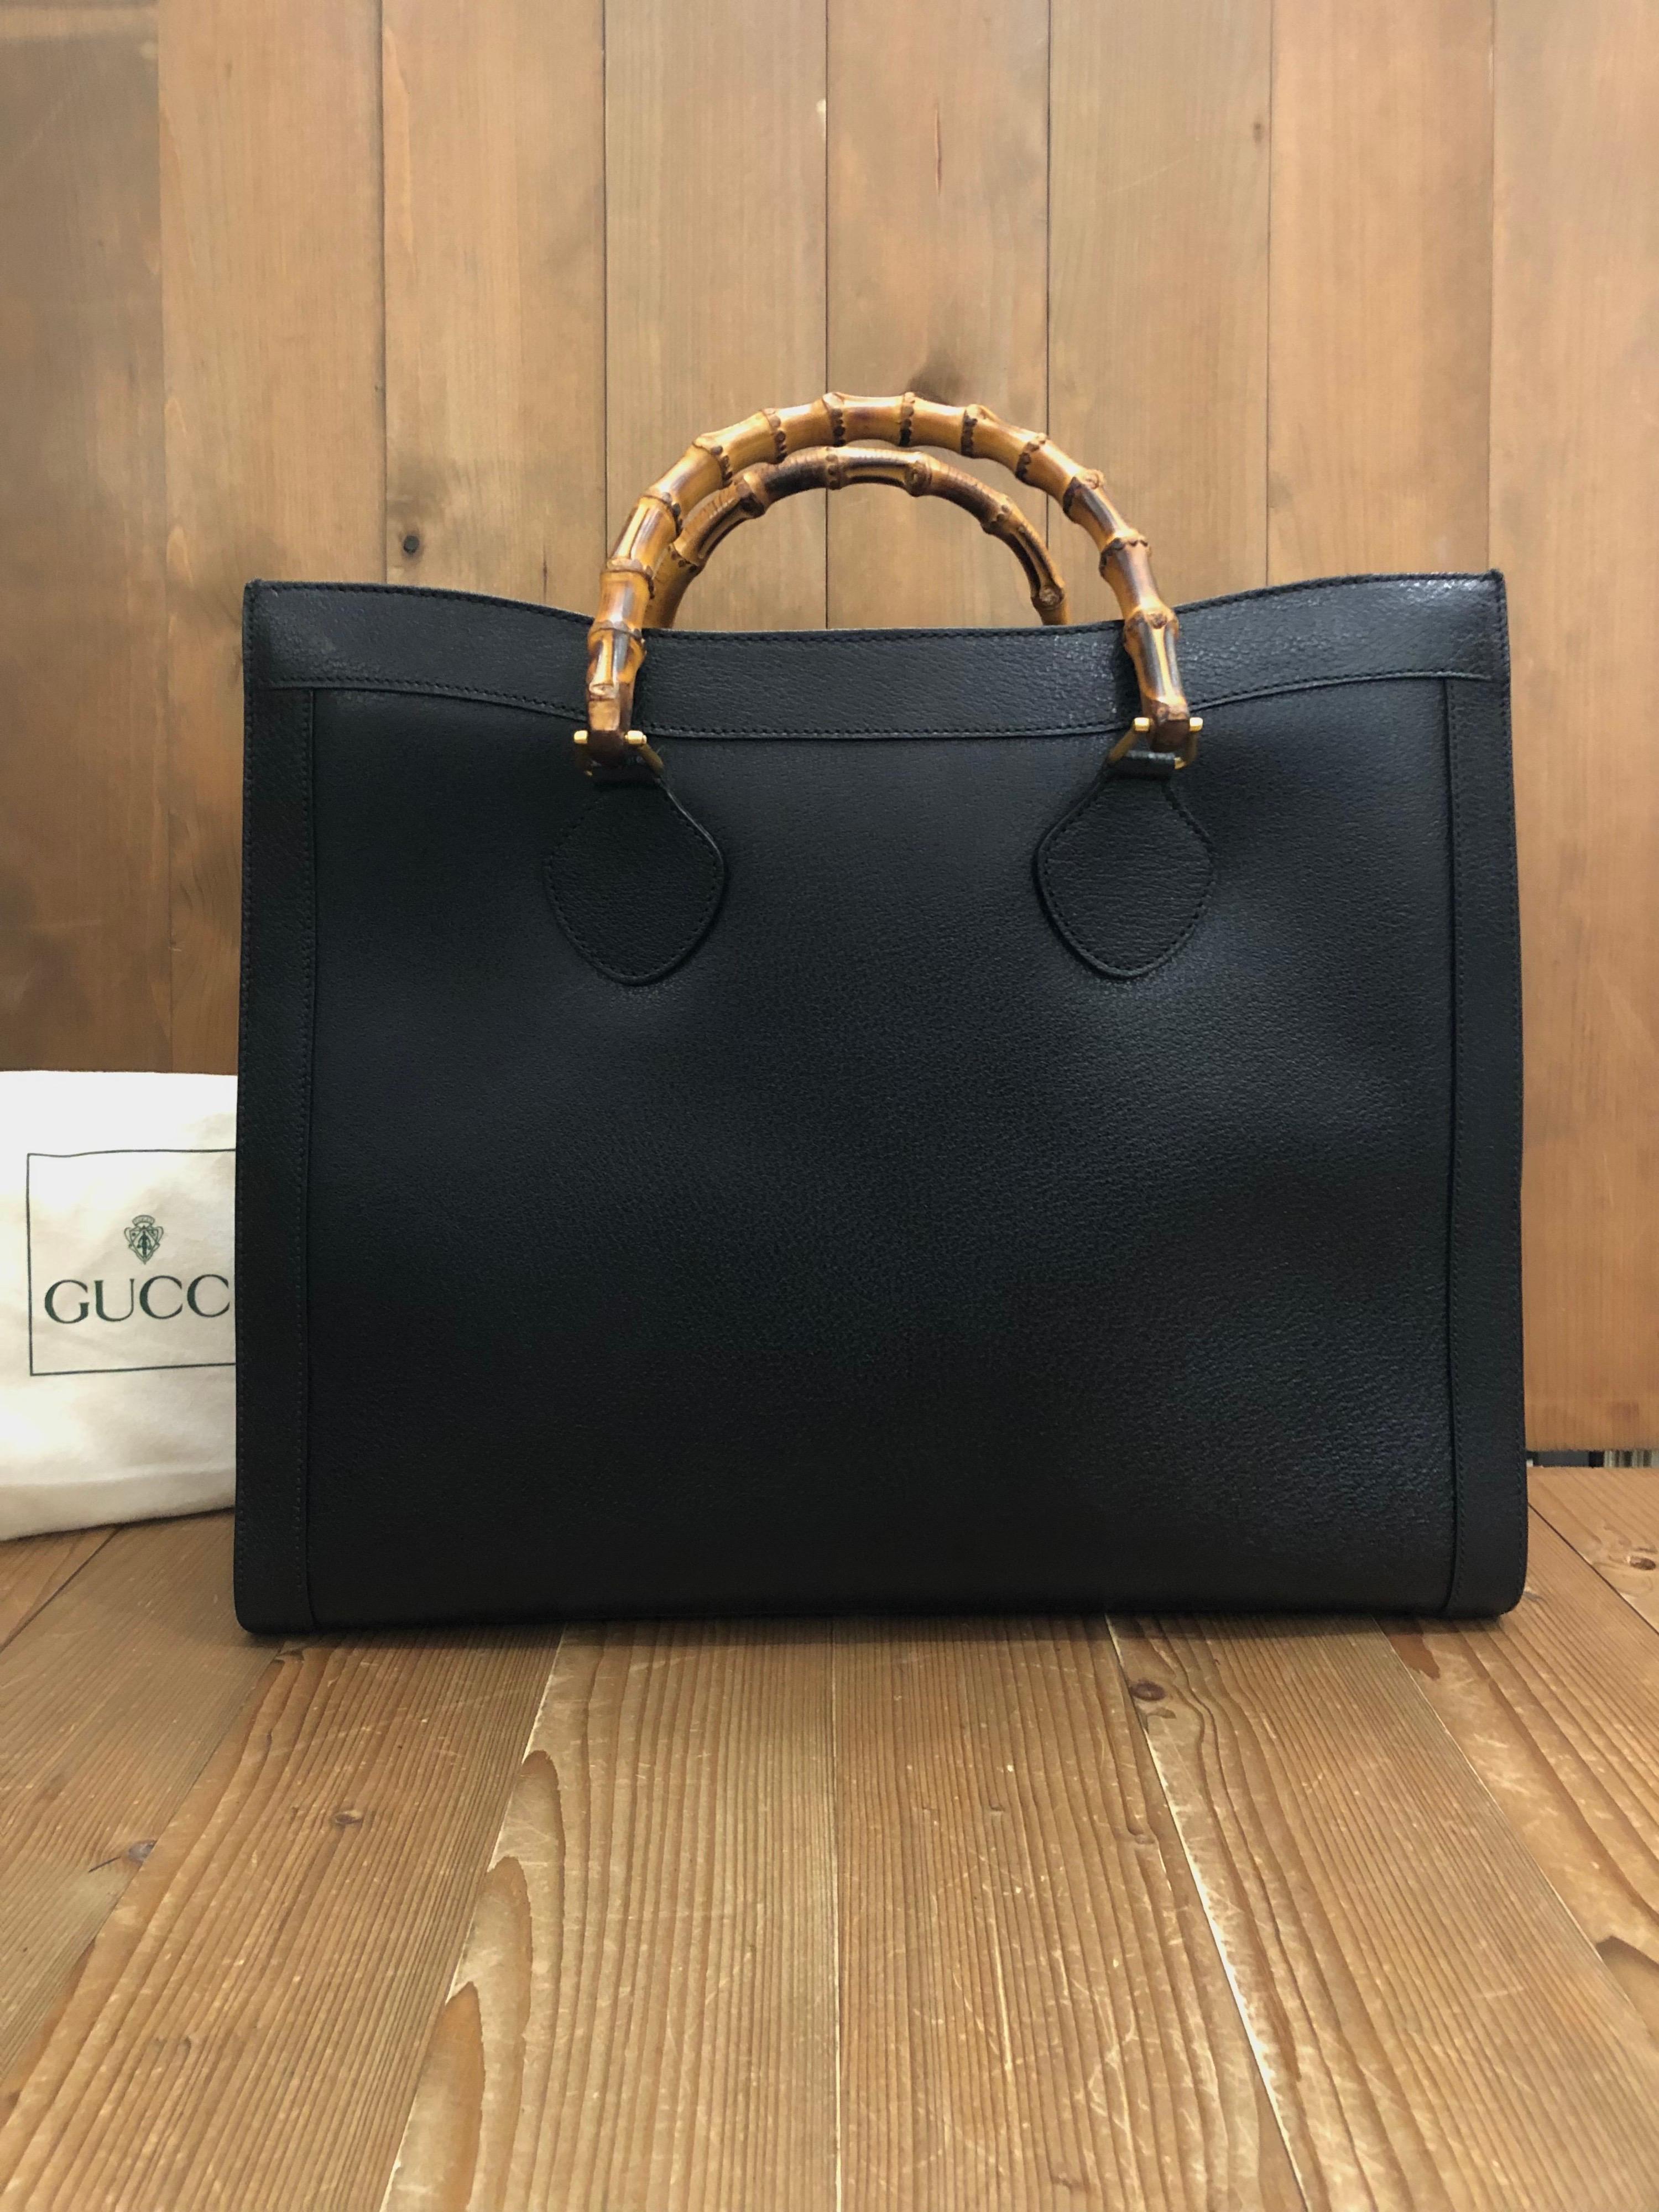 1990s Gucci bamboo tote in black leather. The Bamboo tote is one of Princess Diana's favorite purses. Gucci revamped this Bamboo tote in 2021 winter collection. Made in Italy. Measures 16.75 x 14 x 5.5 inches handle drop 4.5 inches featuring two